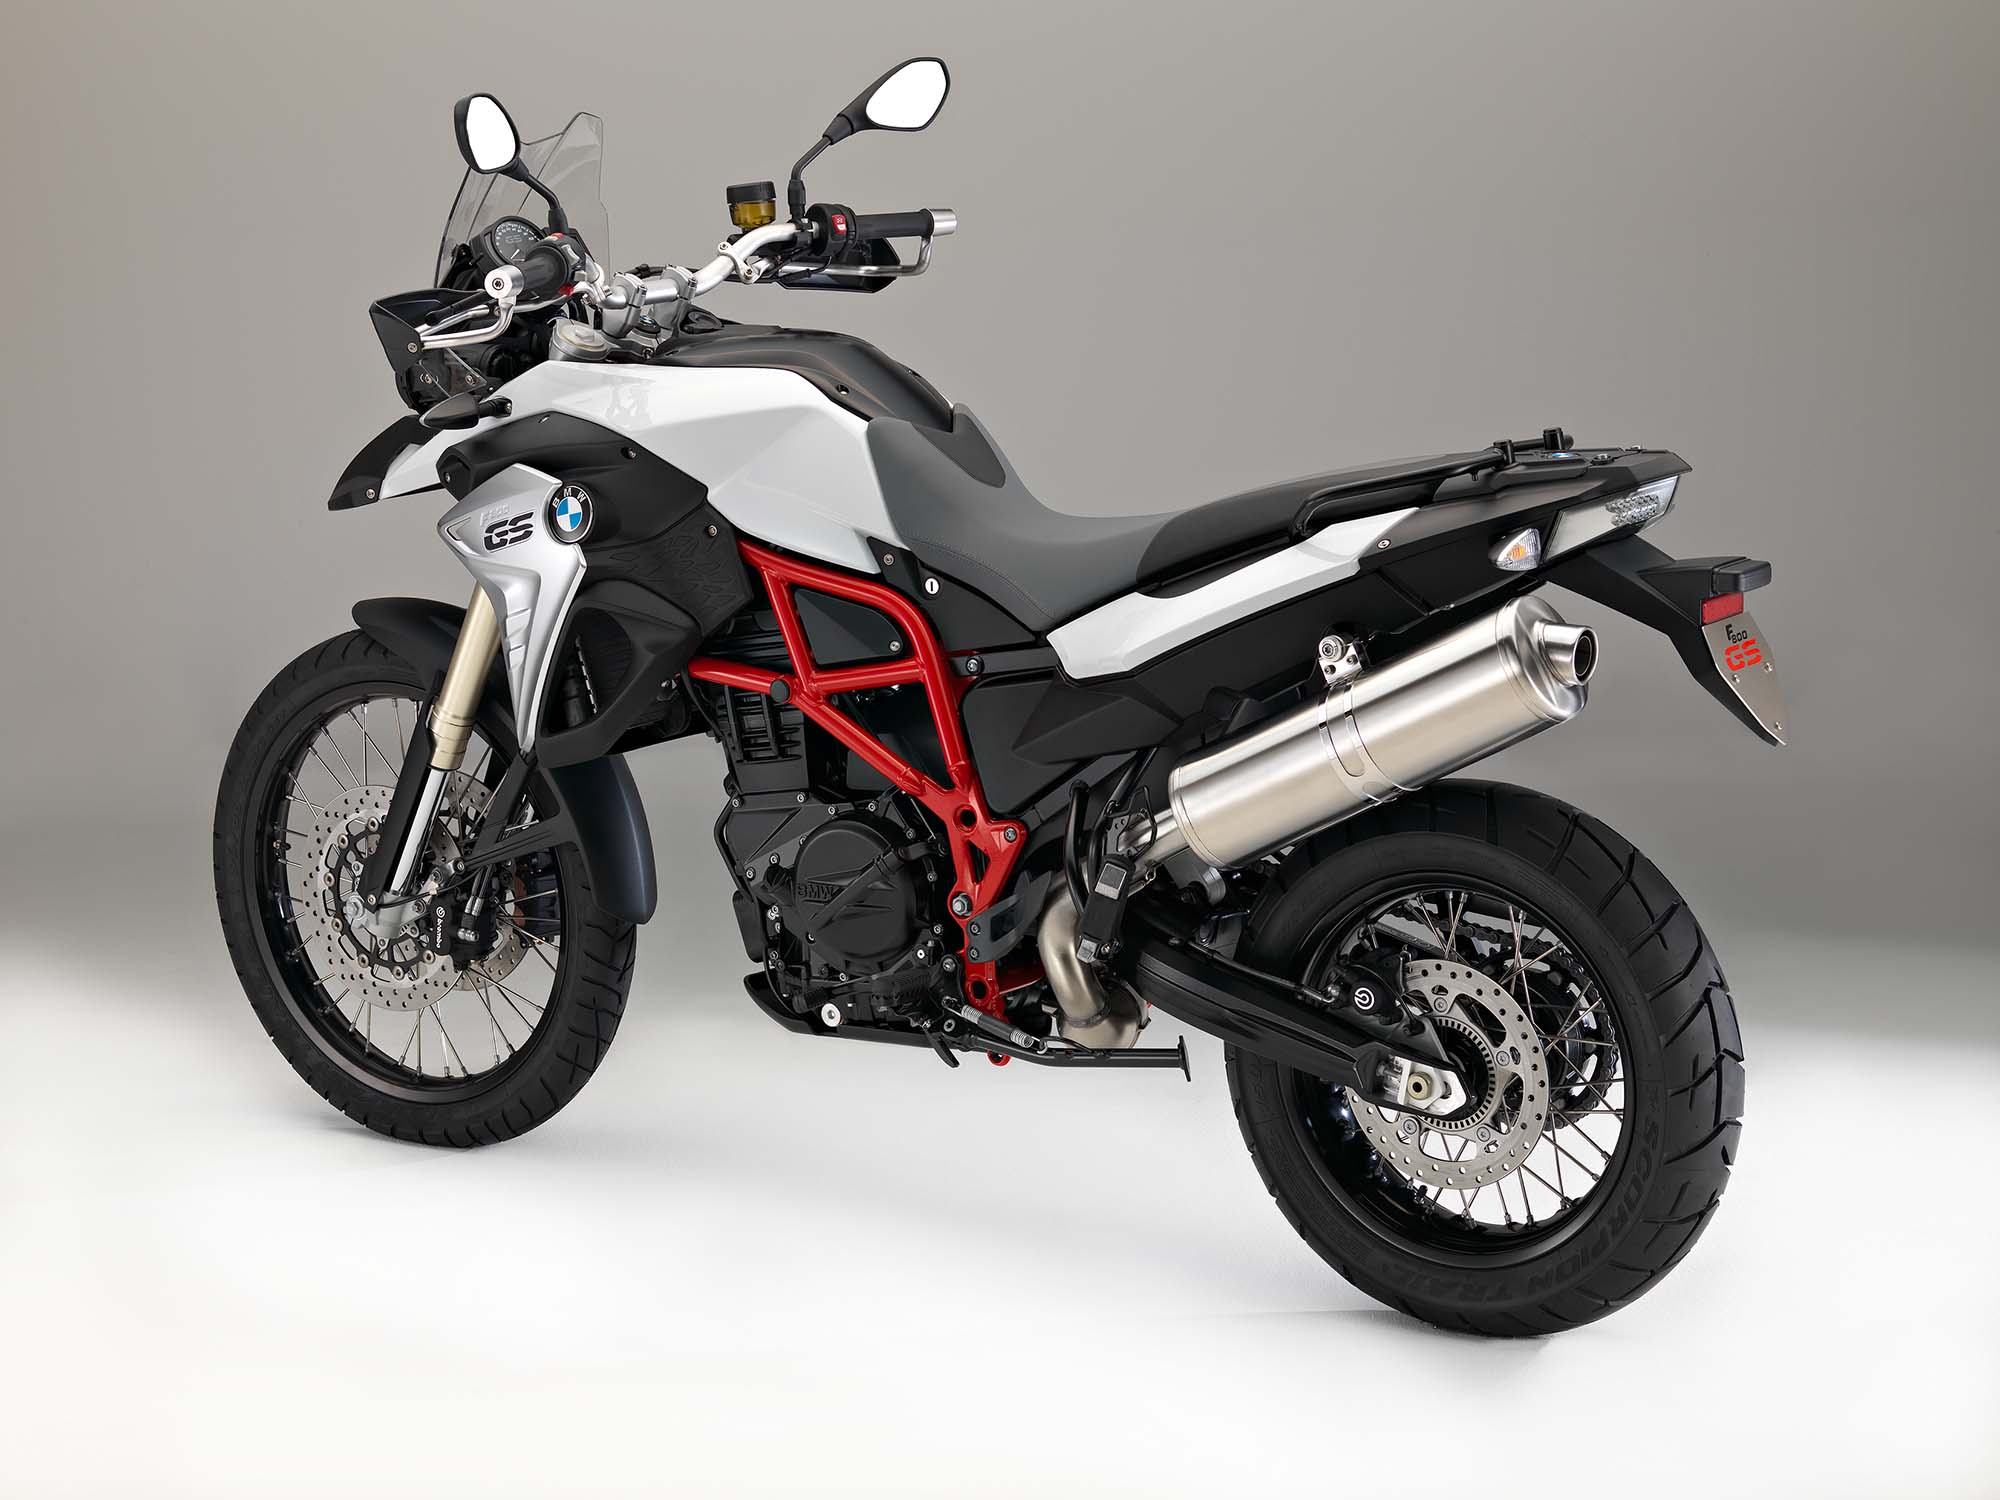 2016 BMW F700GS & F800GS Get Cosmetic Changes